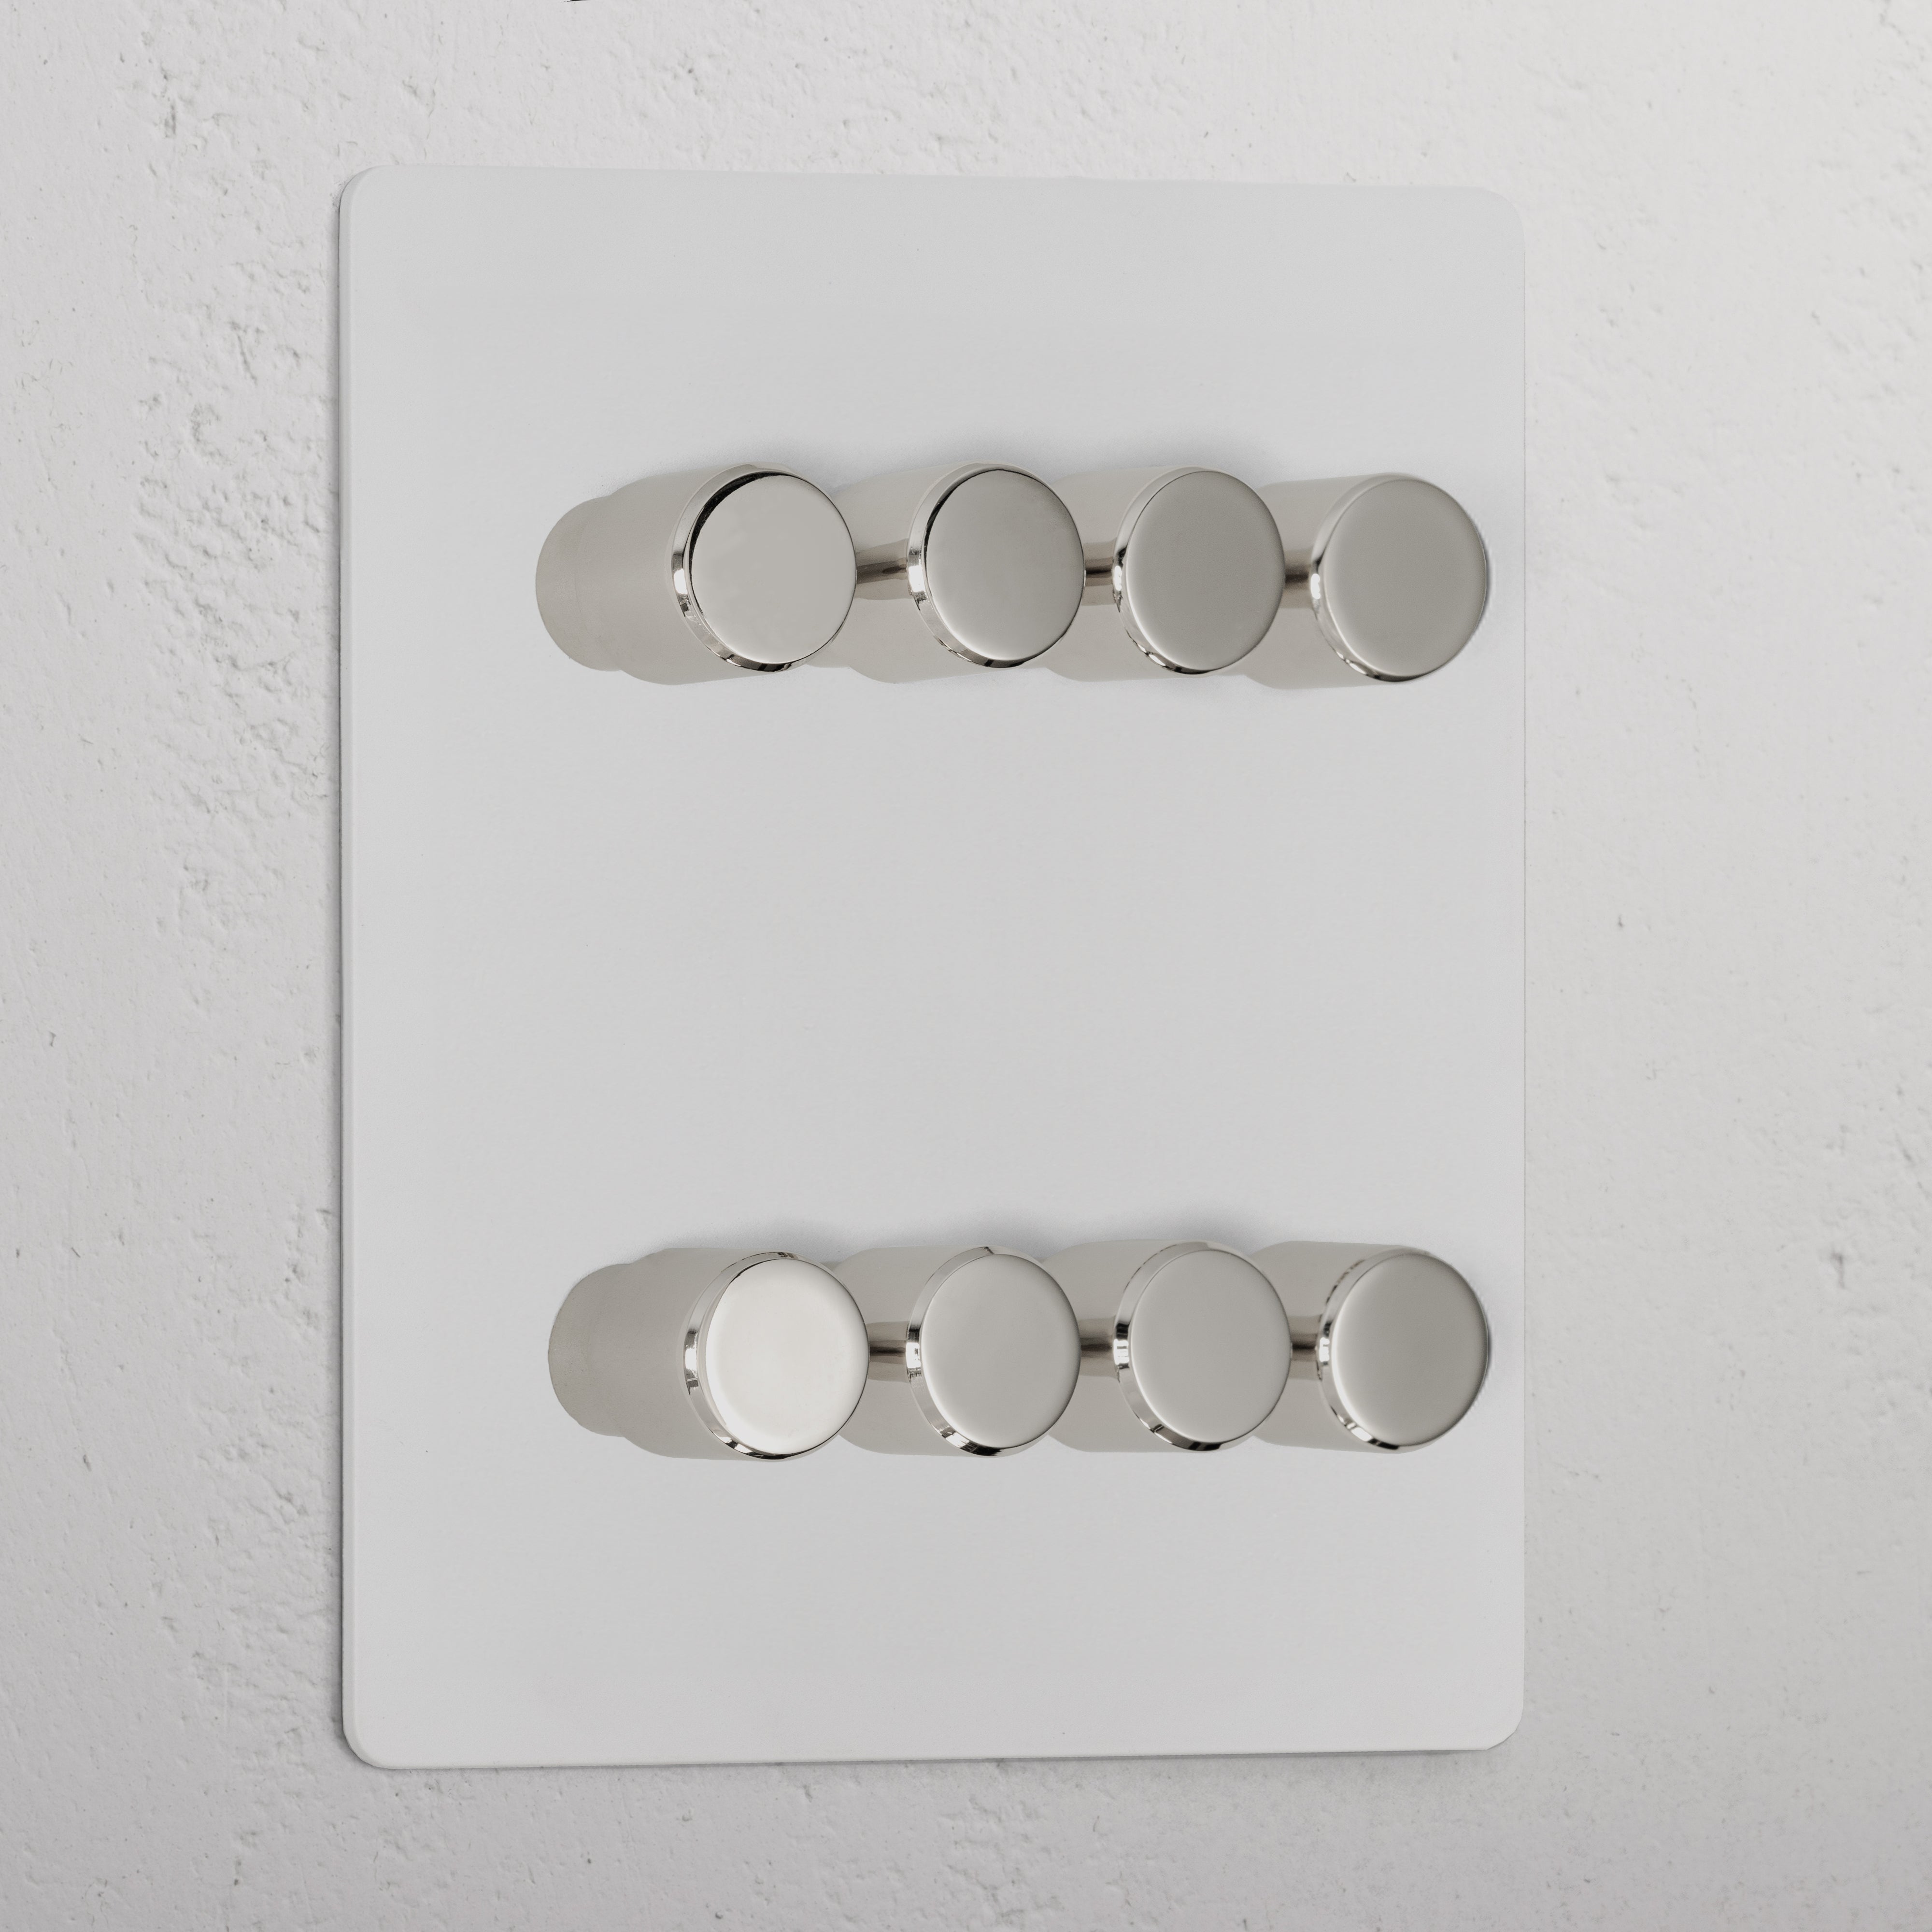 8G Dimmer Switch - Paintable Polished Nickel